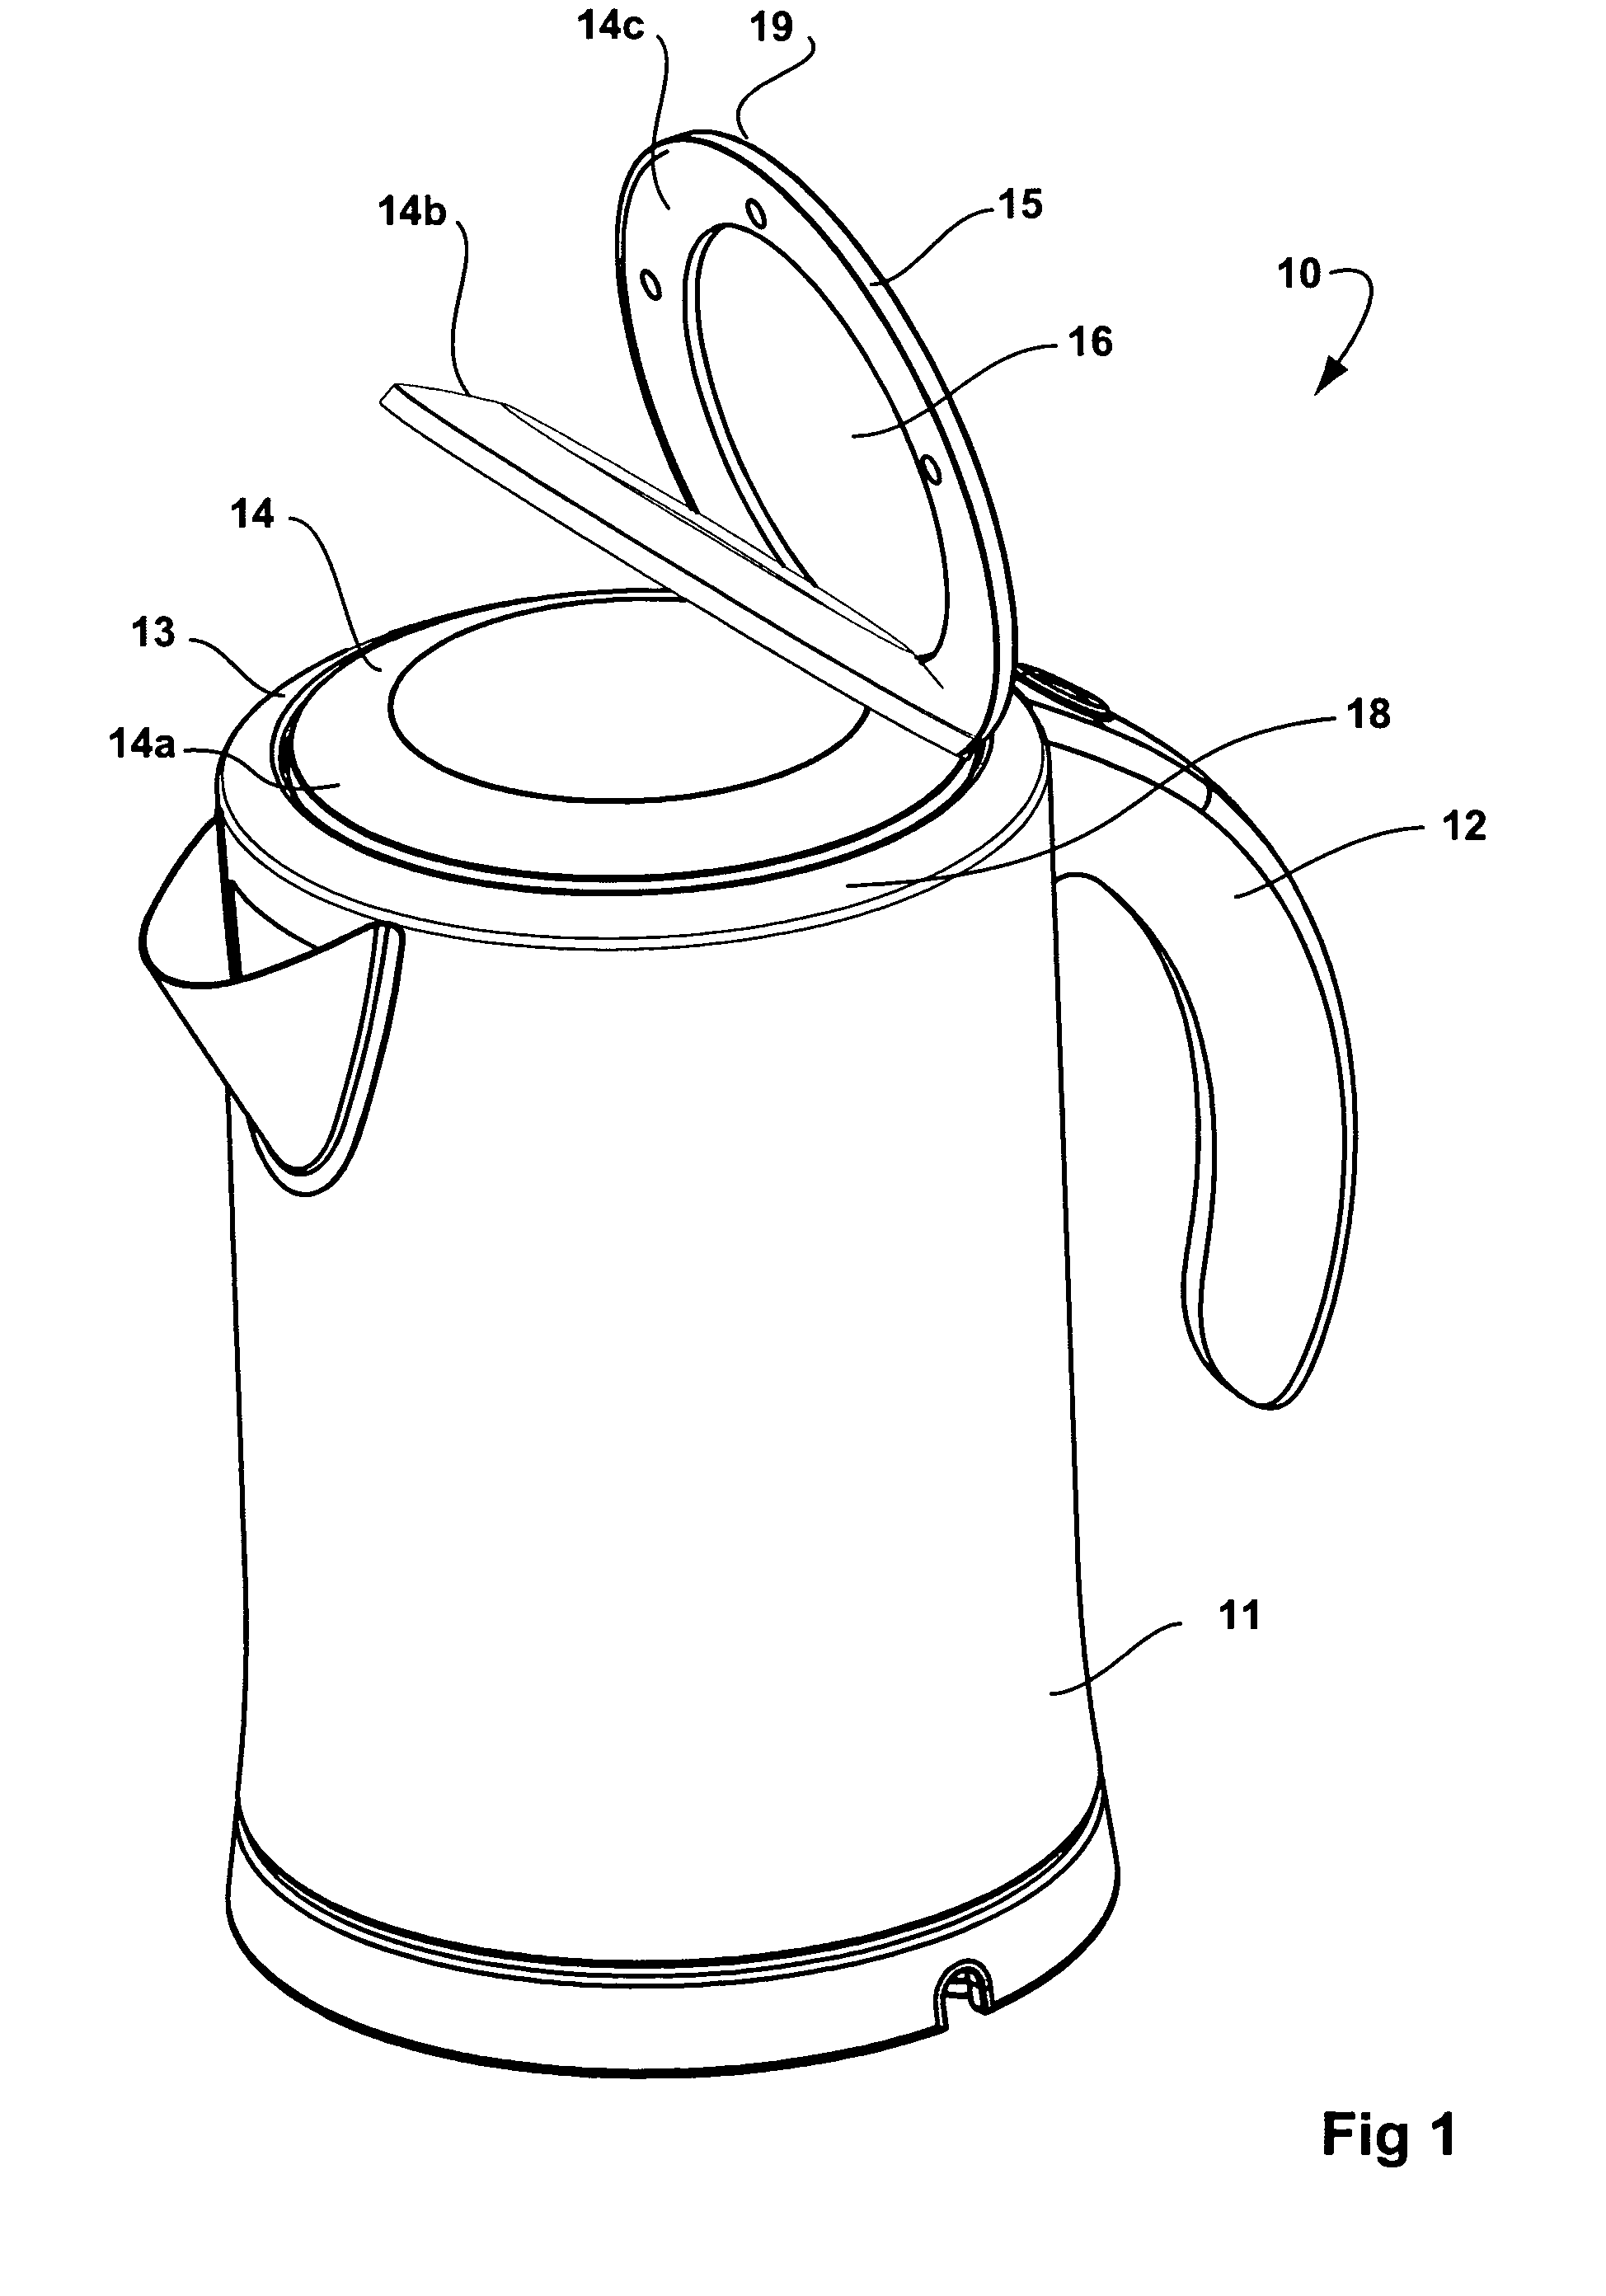 Kettle with lid damping mechanism